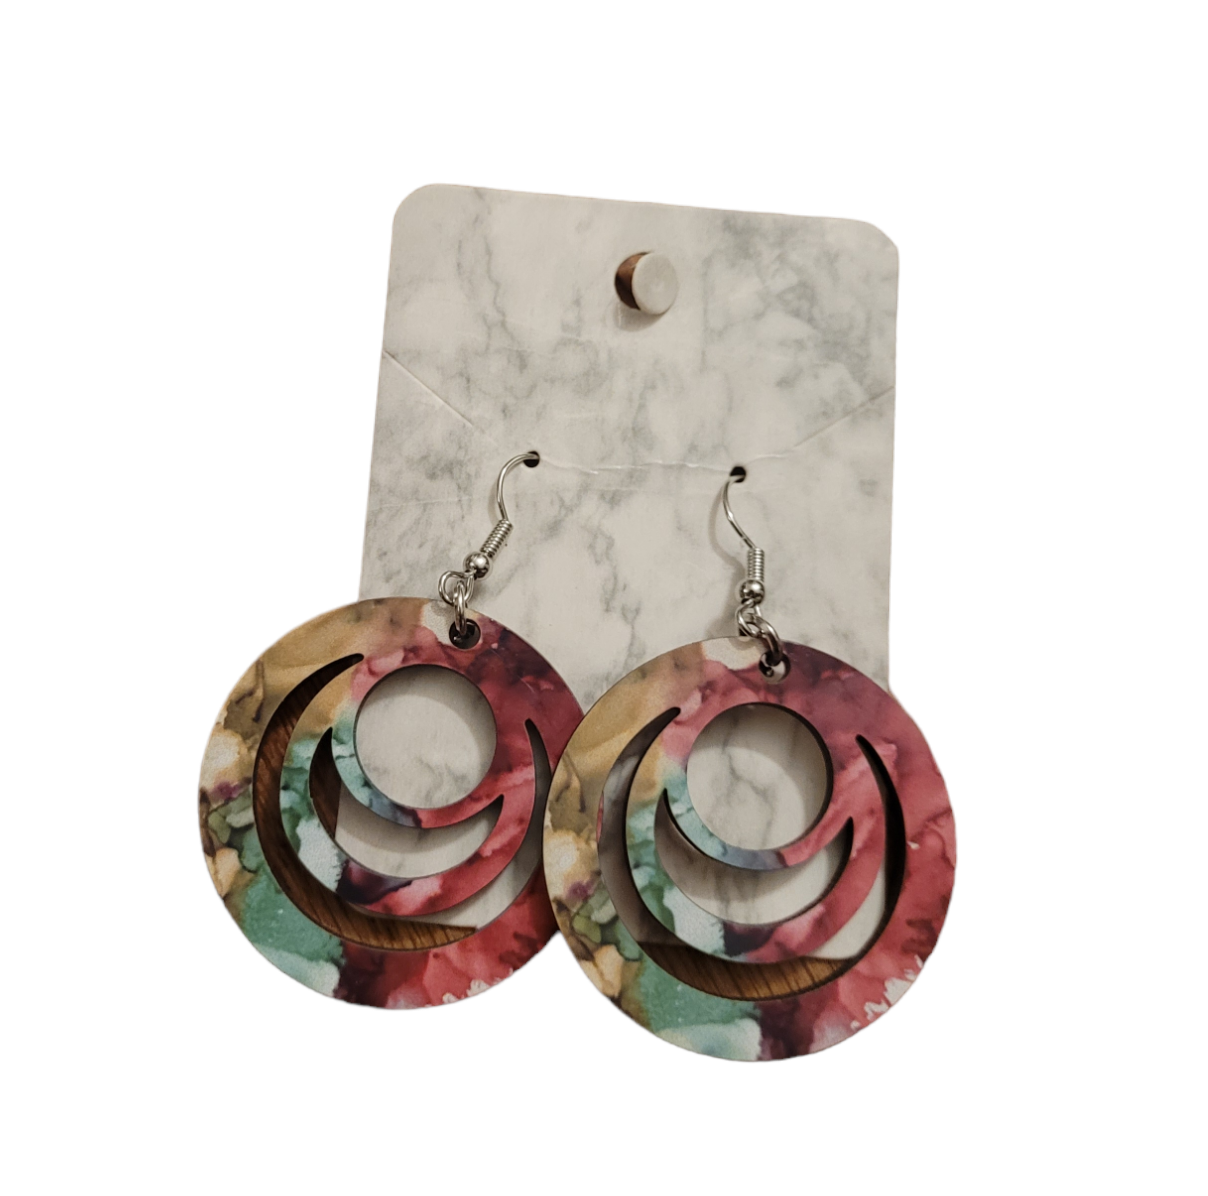 Hollow Round Earrings with Alcohol Ink Design